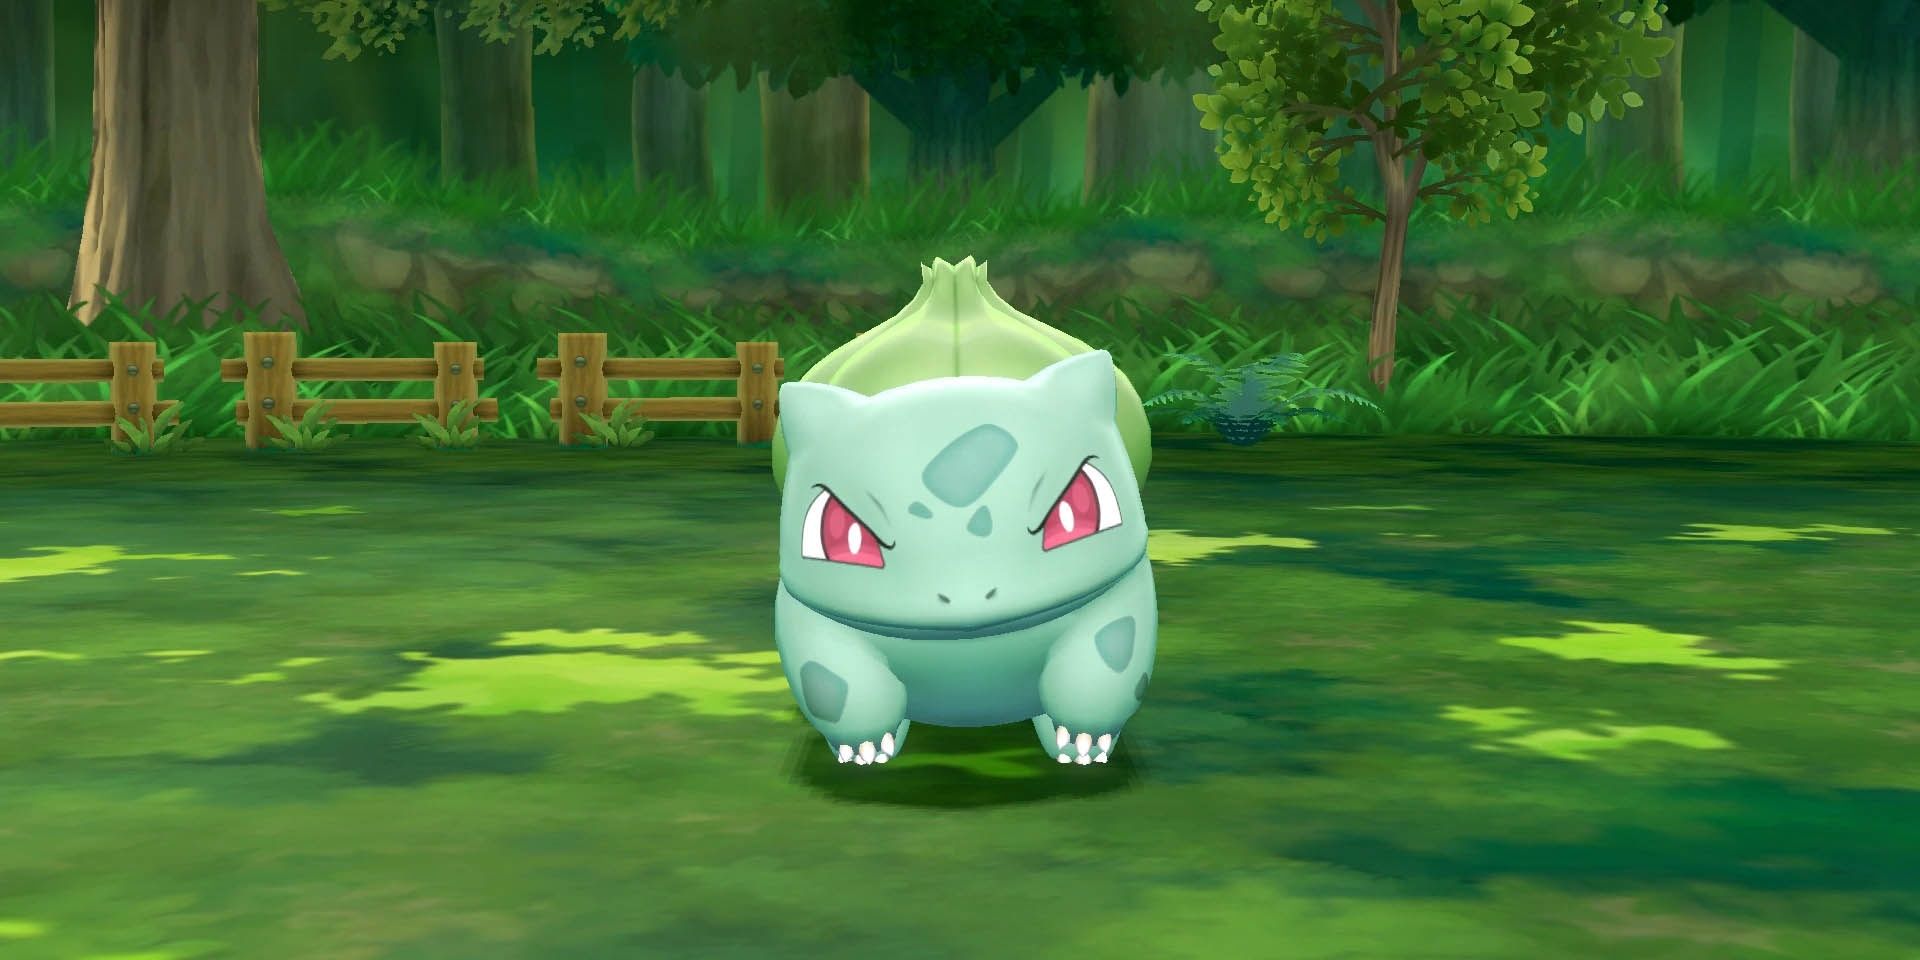 Bulbasaur looks ready to attack in the wilderness in the Pokémon series